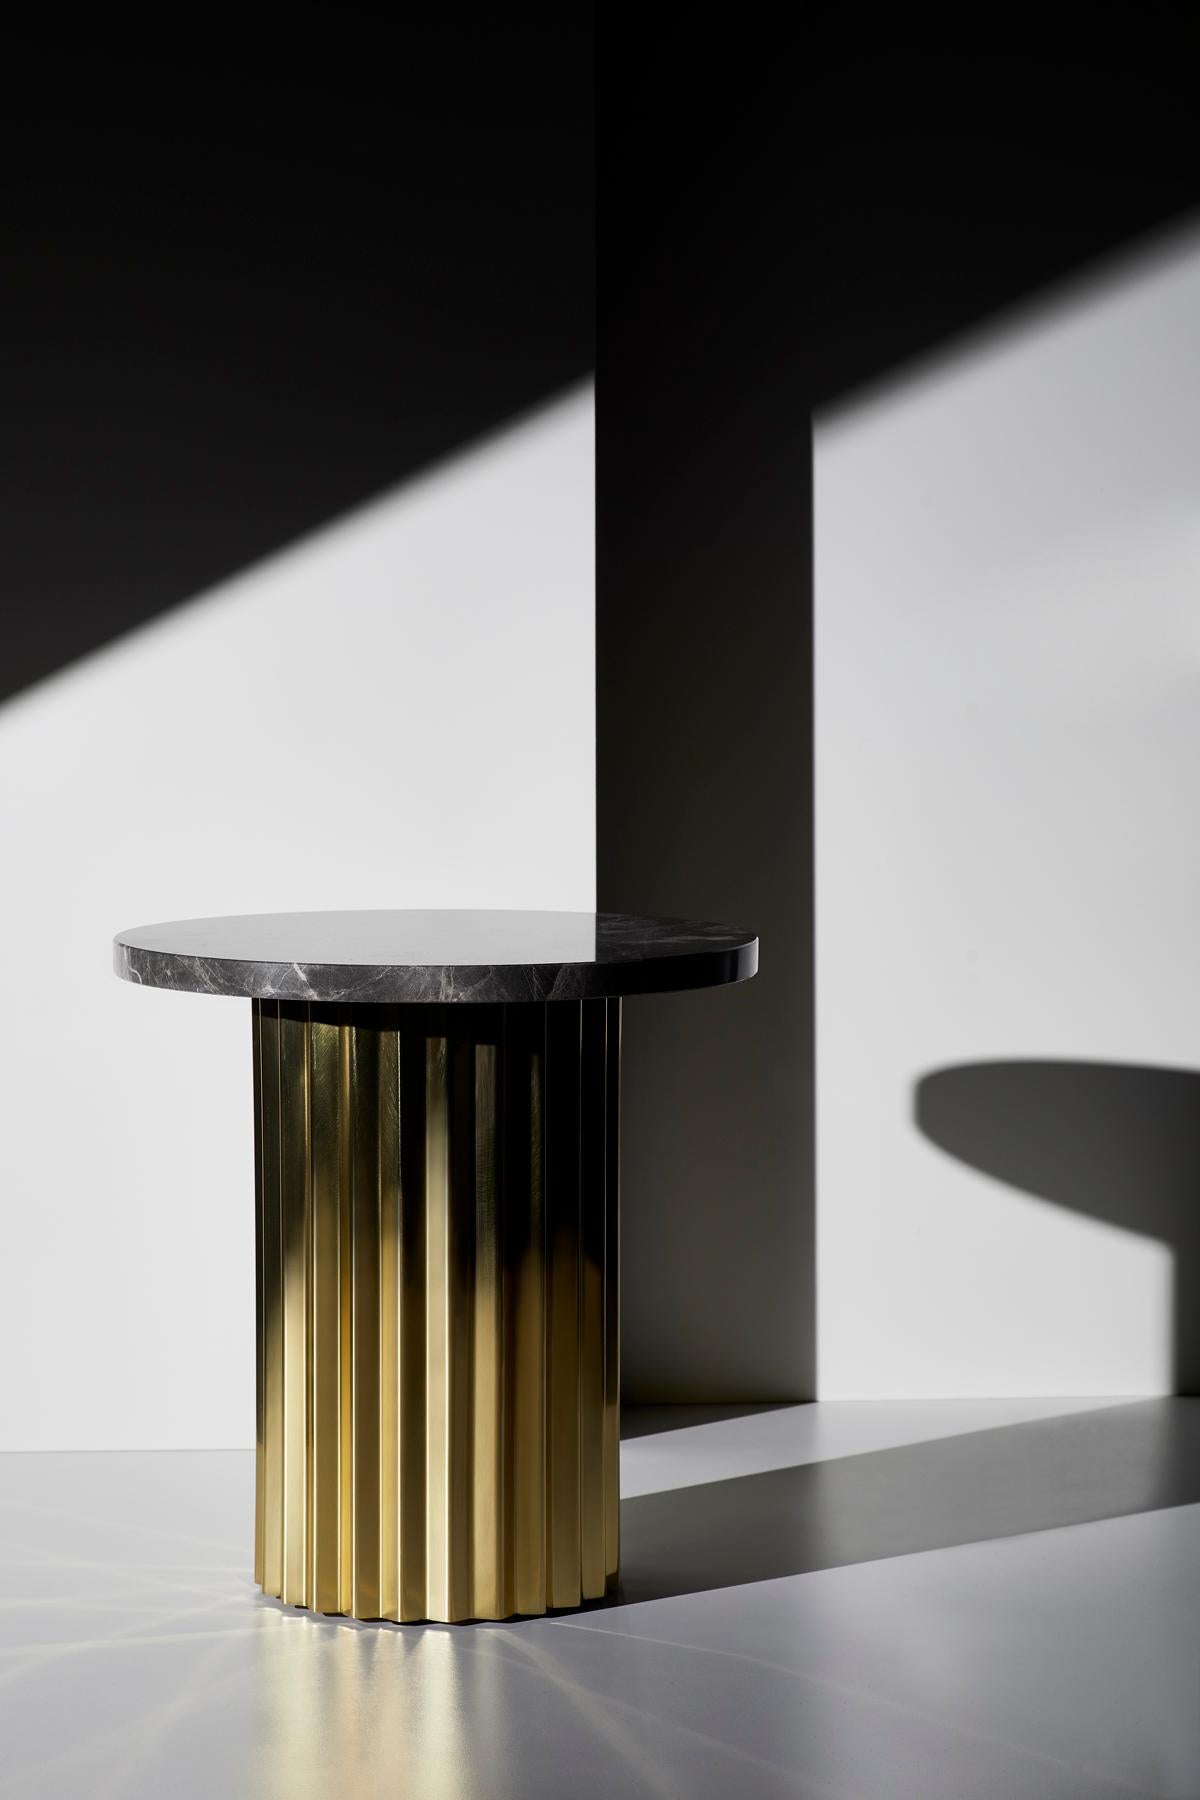 Set of 2 marble tables by Lisette Rützou
Dimensions:
D 40 x H 41 cm
Materials: Marble, oak tabletop, brass column


 Lisette Rützou’s design is motivated by an urge to articulate a story. Inspired by the beauty of materials, form and